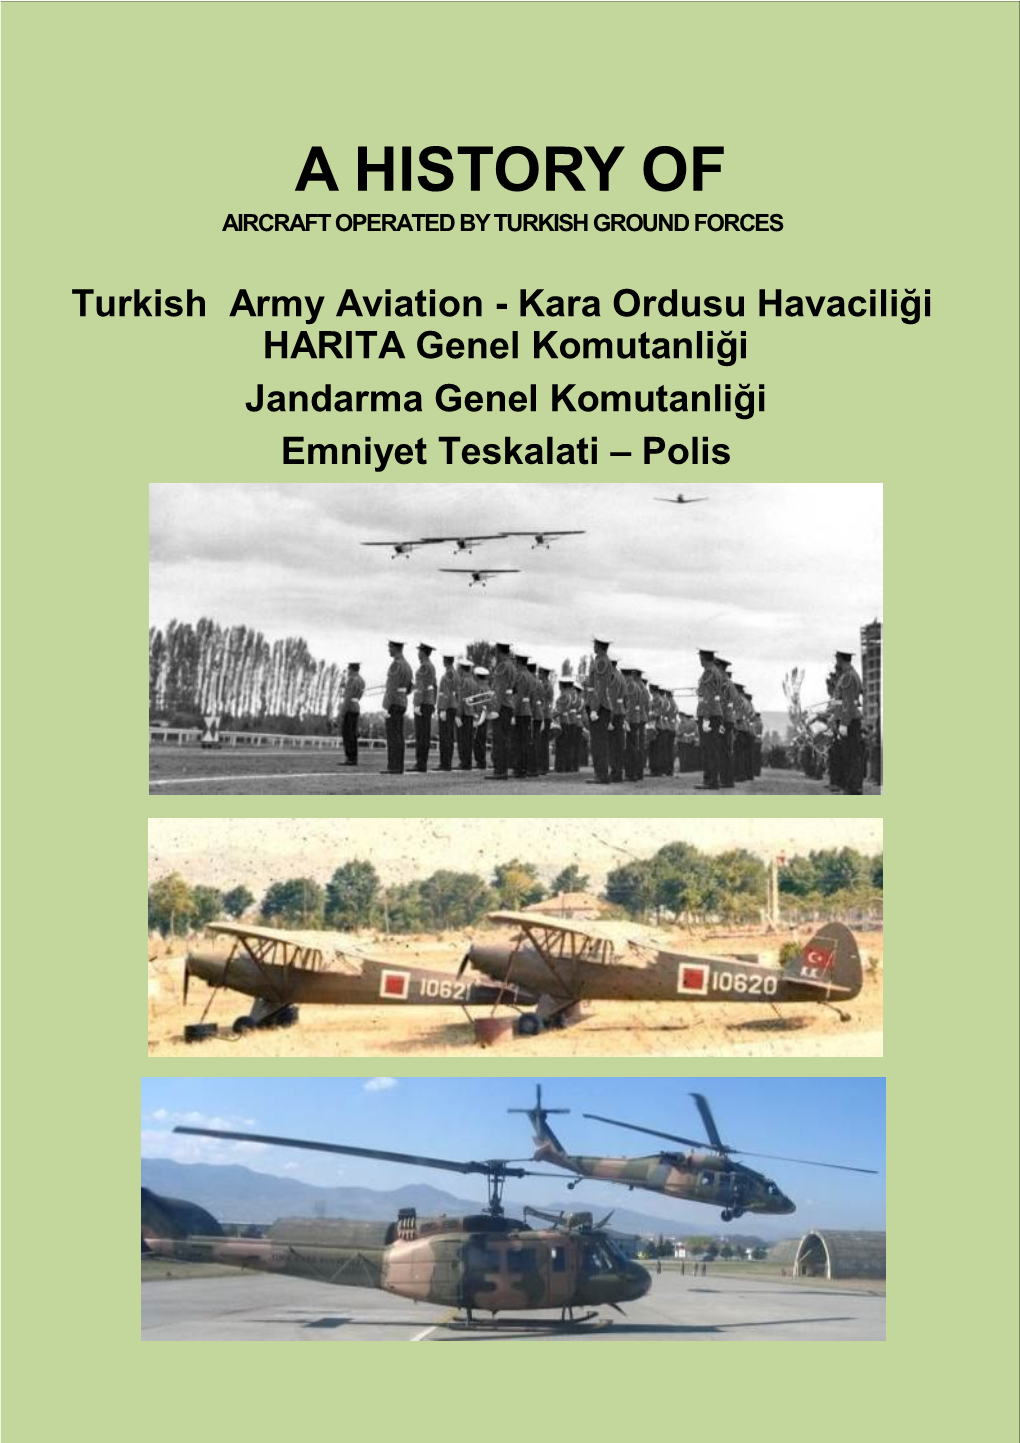 Aircraft of the Turkish Ground Forces